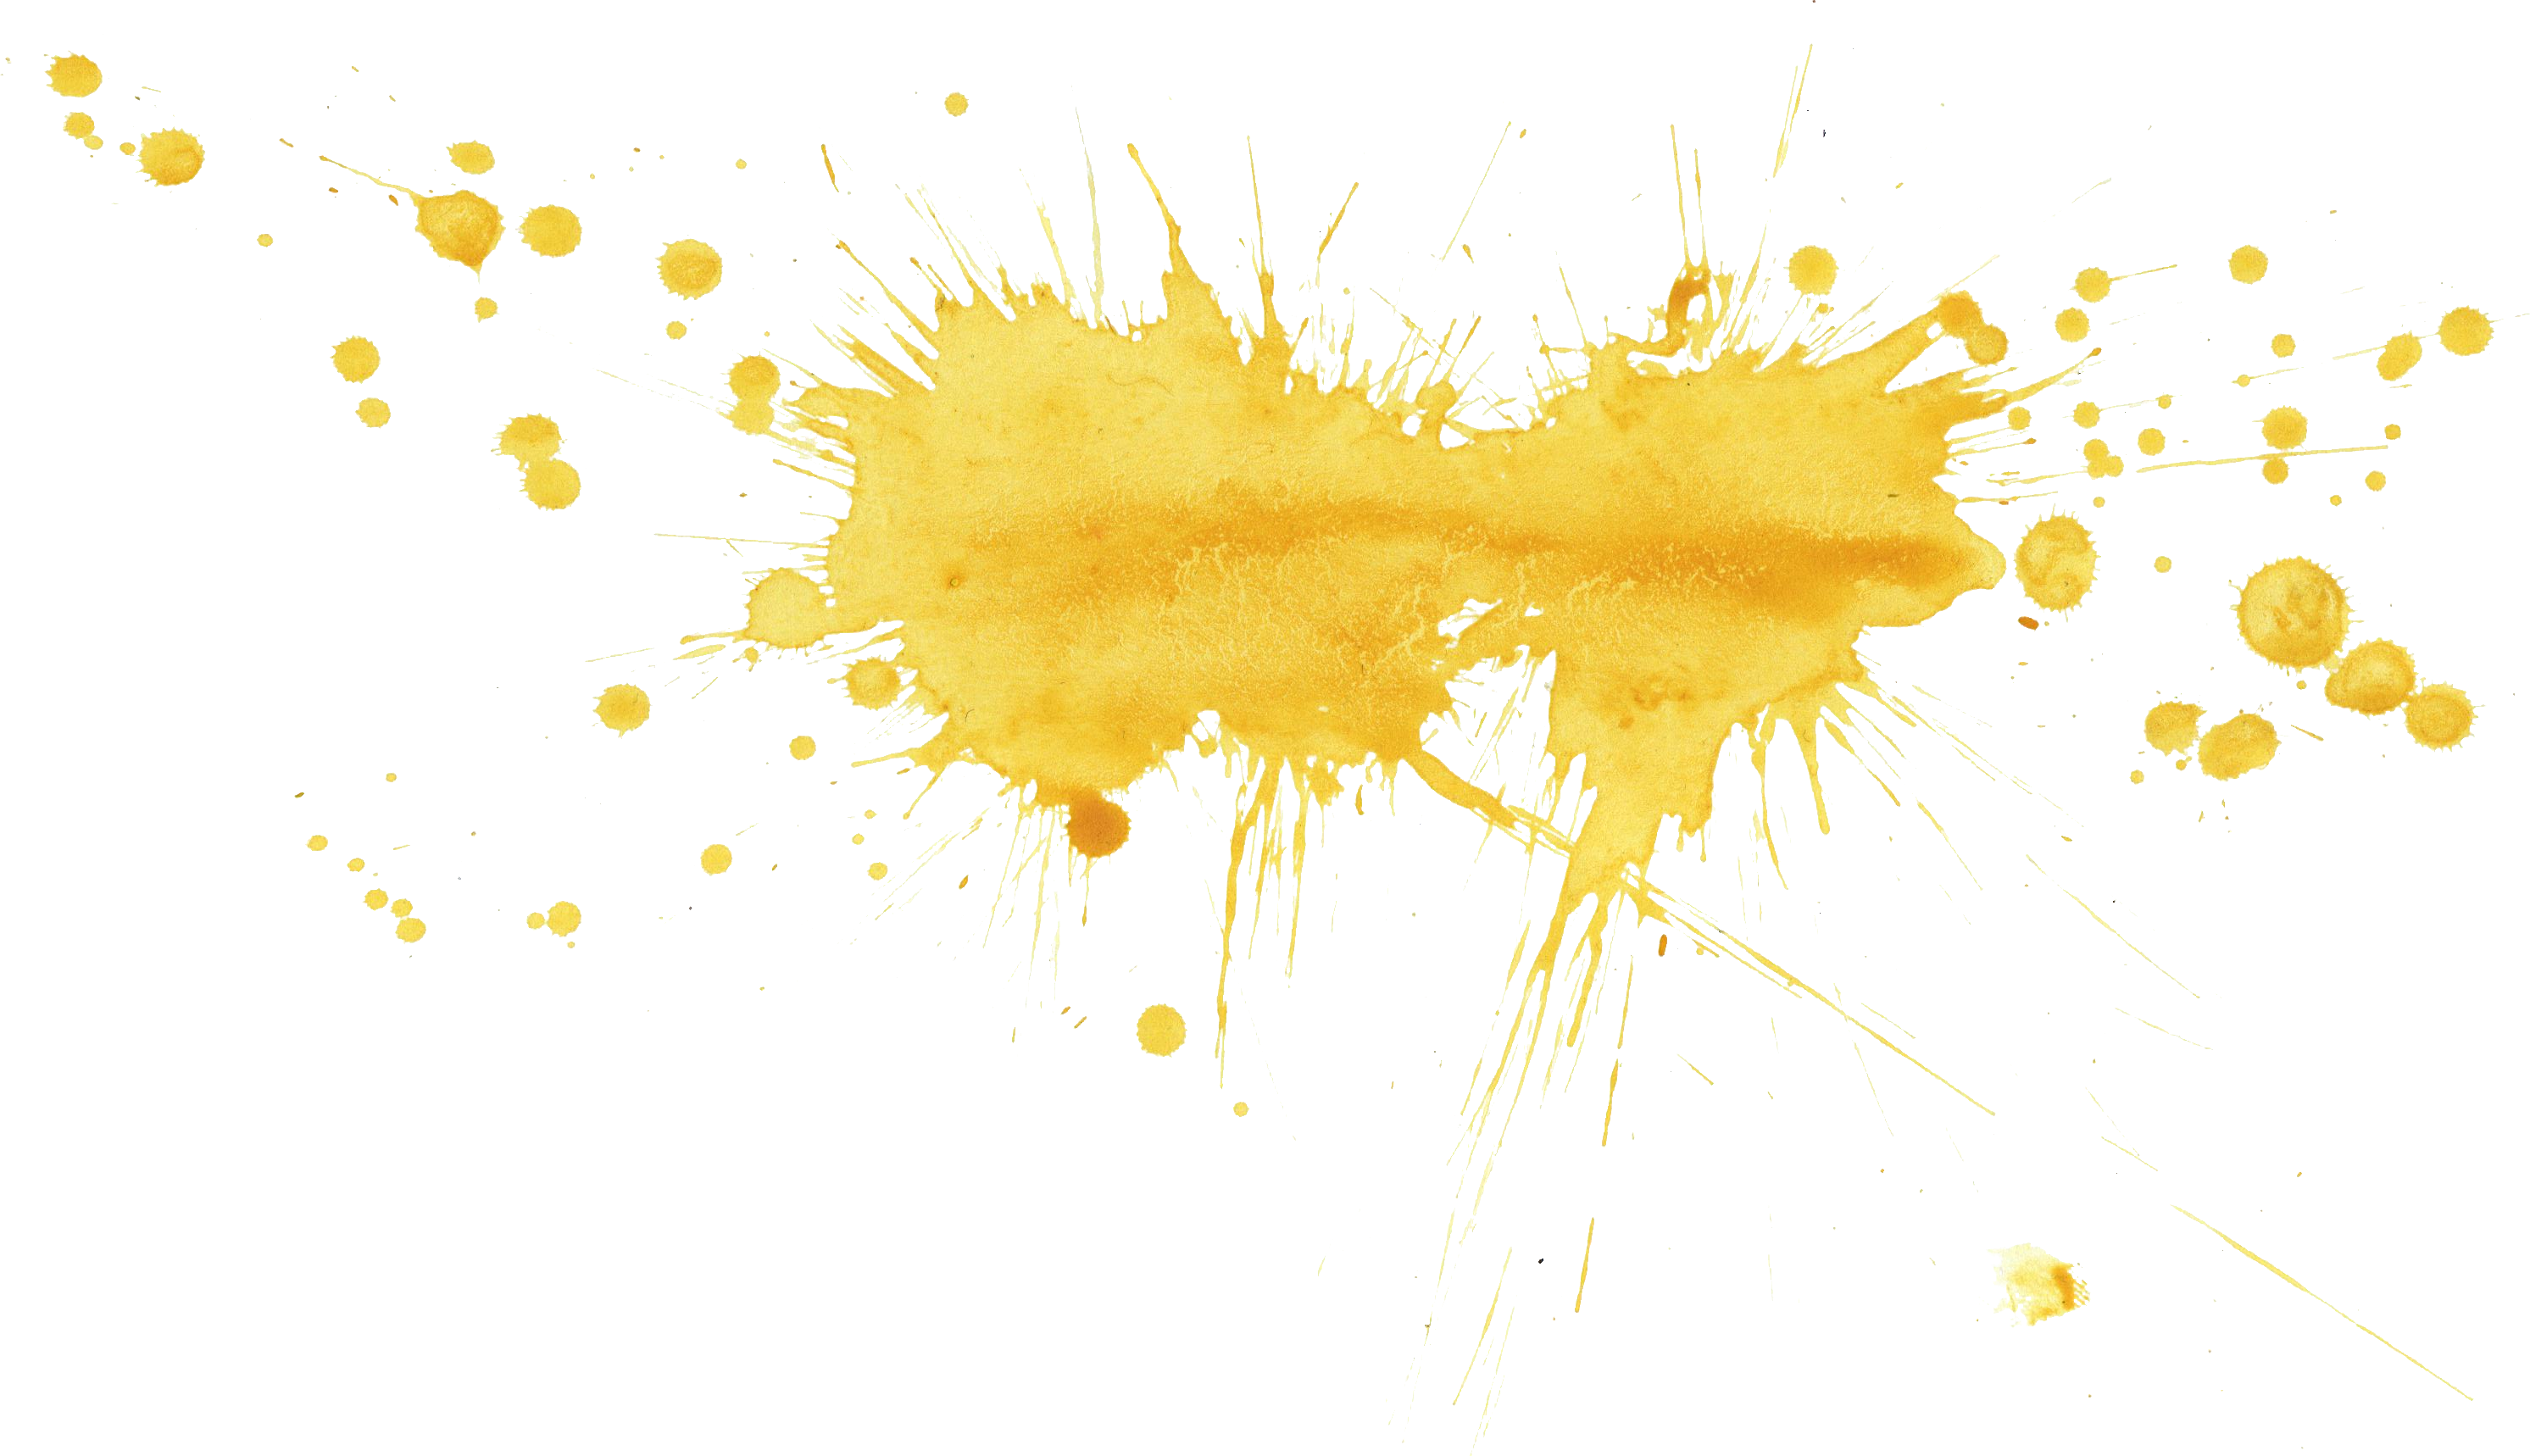 Free Download - Watercolor Yellow Splatter Transparent Background (2985x1718)